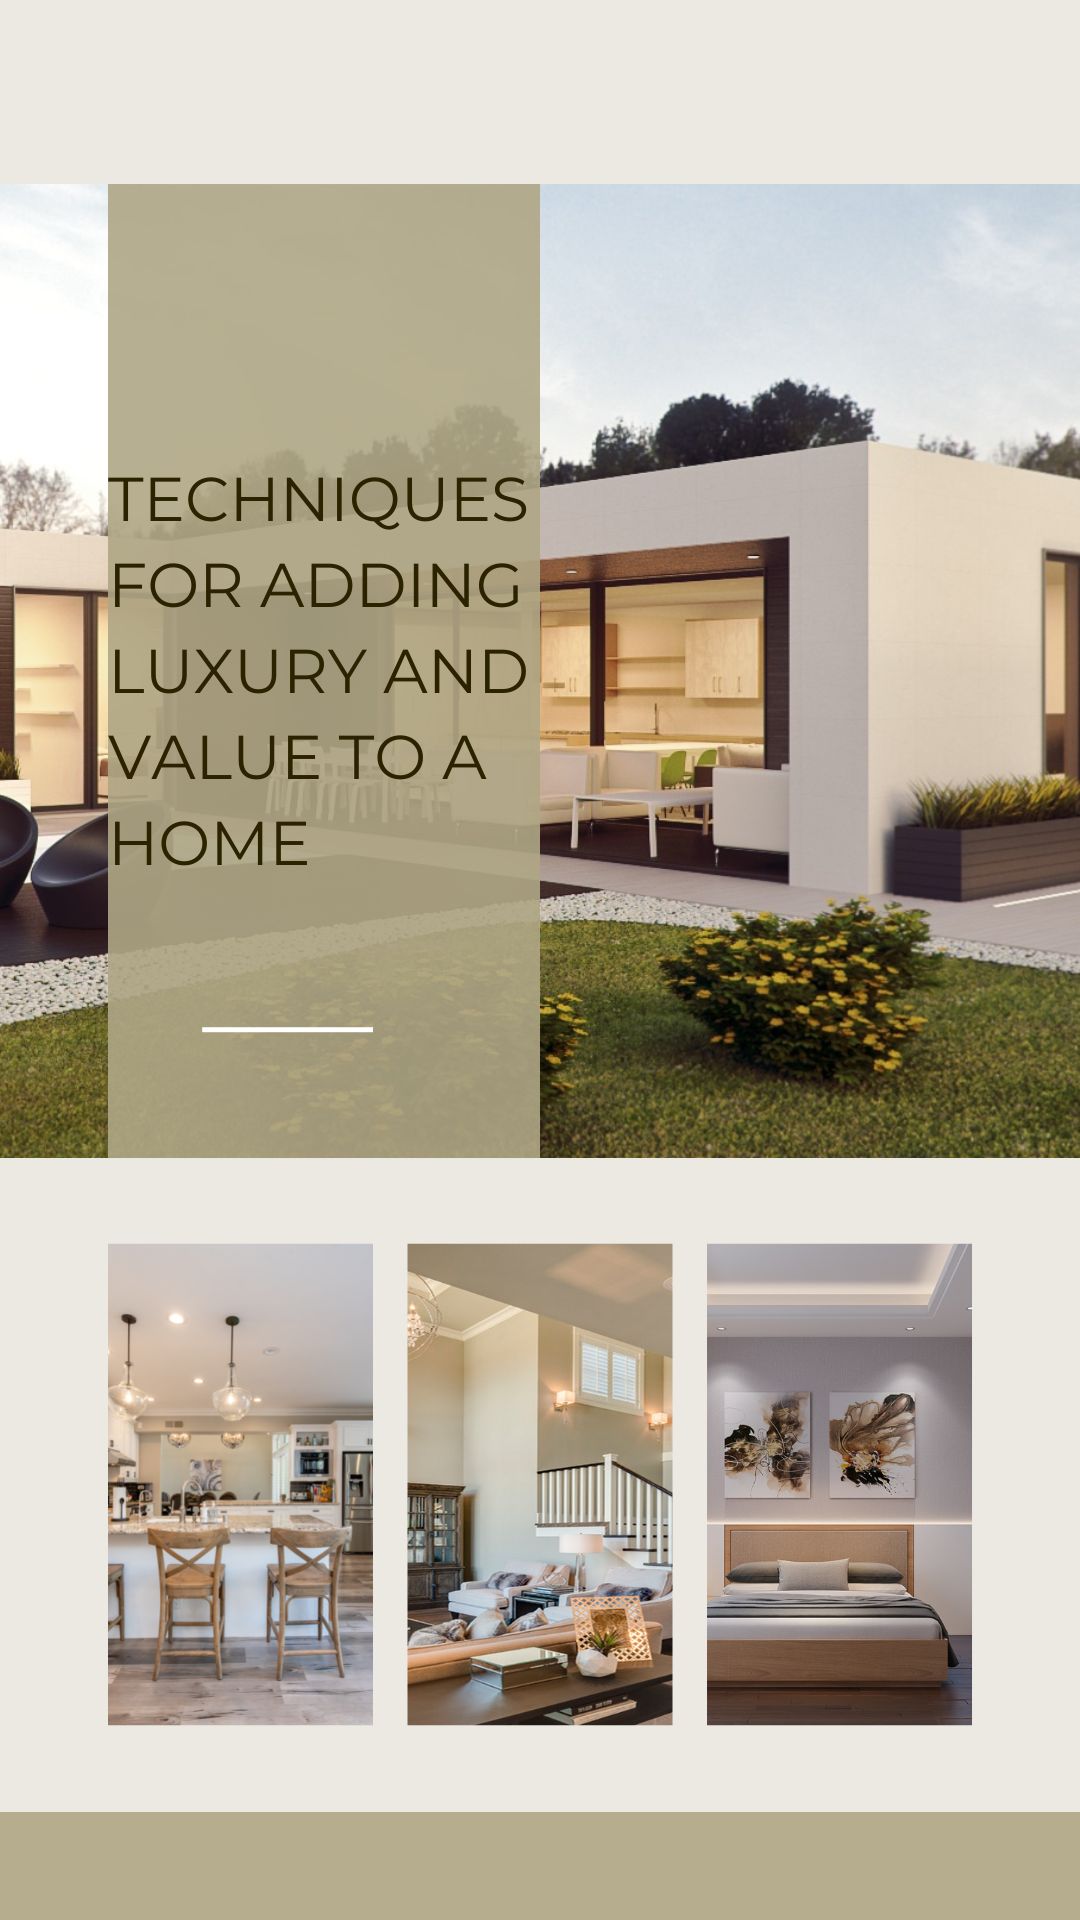 Techniques for Adding Luxury and Value to a Home